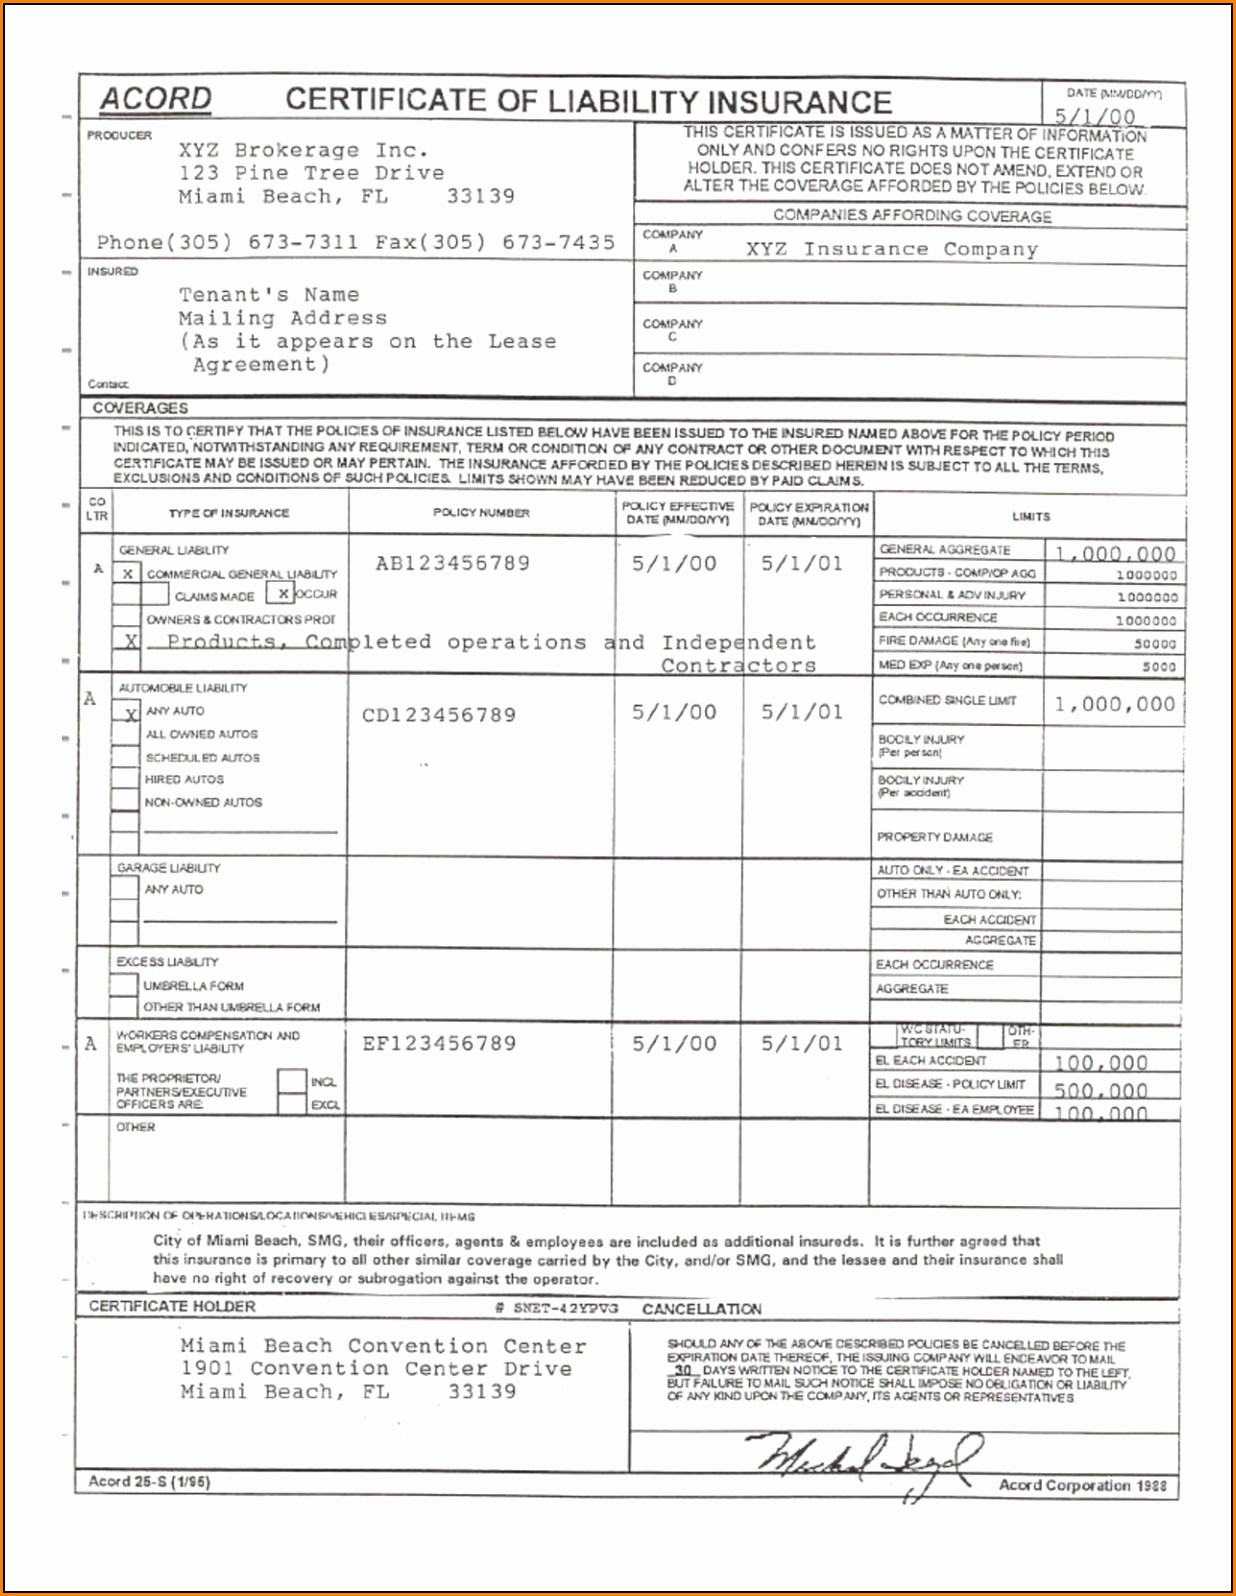 Free Fillable Acord Forms - Form : Resume Examples #yKVBJNgVMB1236 x 1596